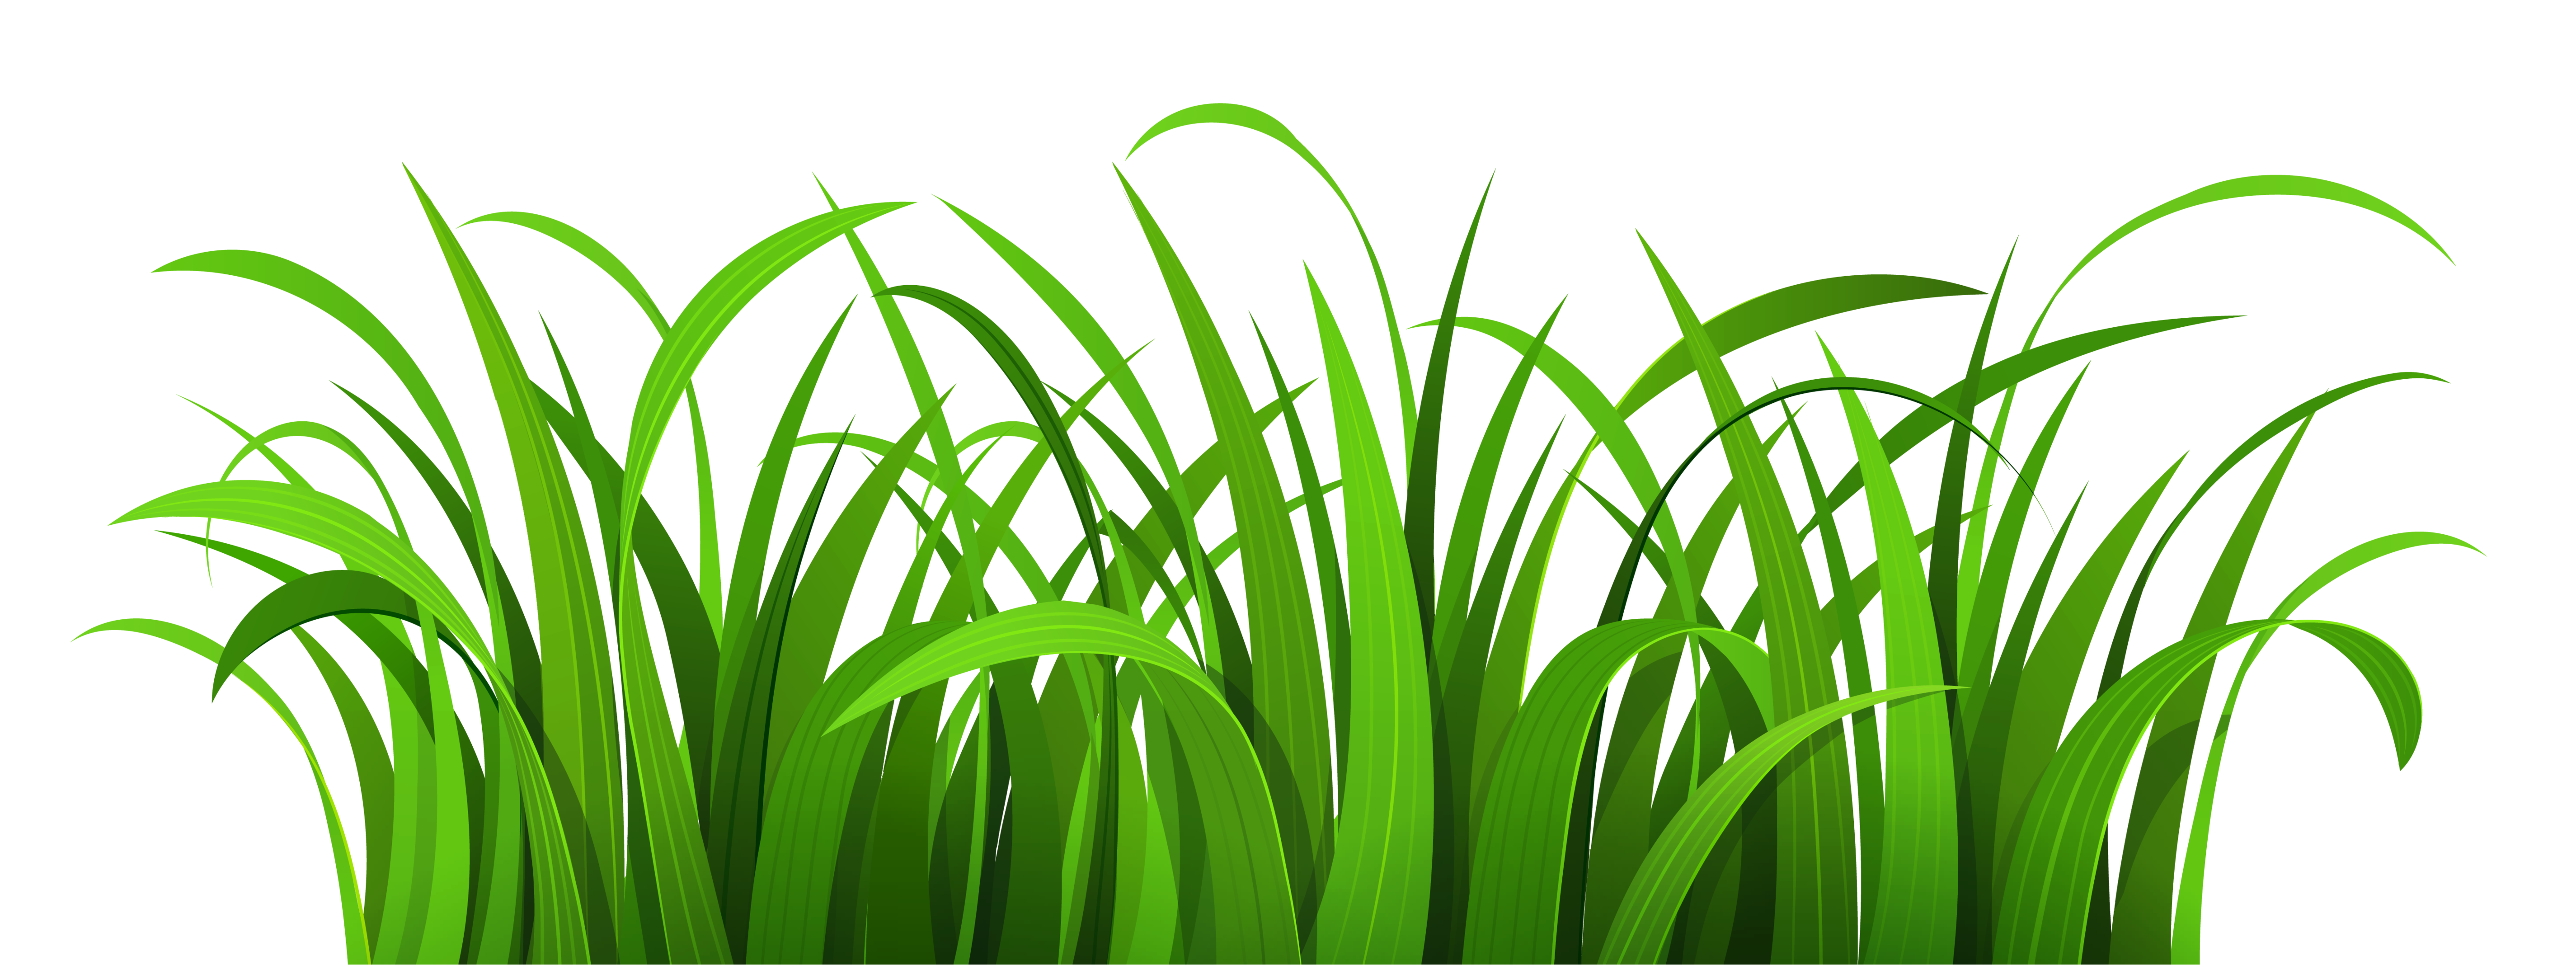 Free Clip Art Grass Clipart - Free to use Clip Art Resource